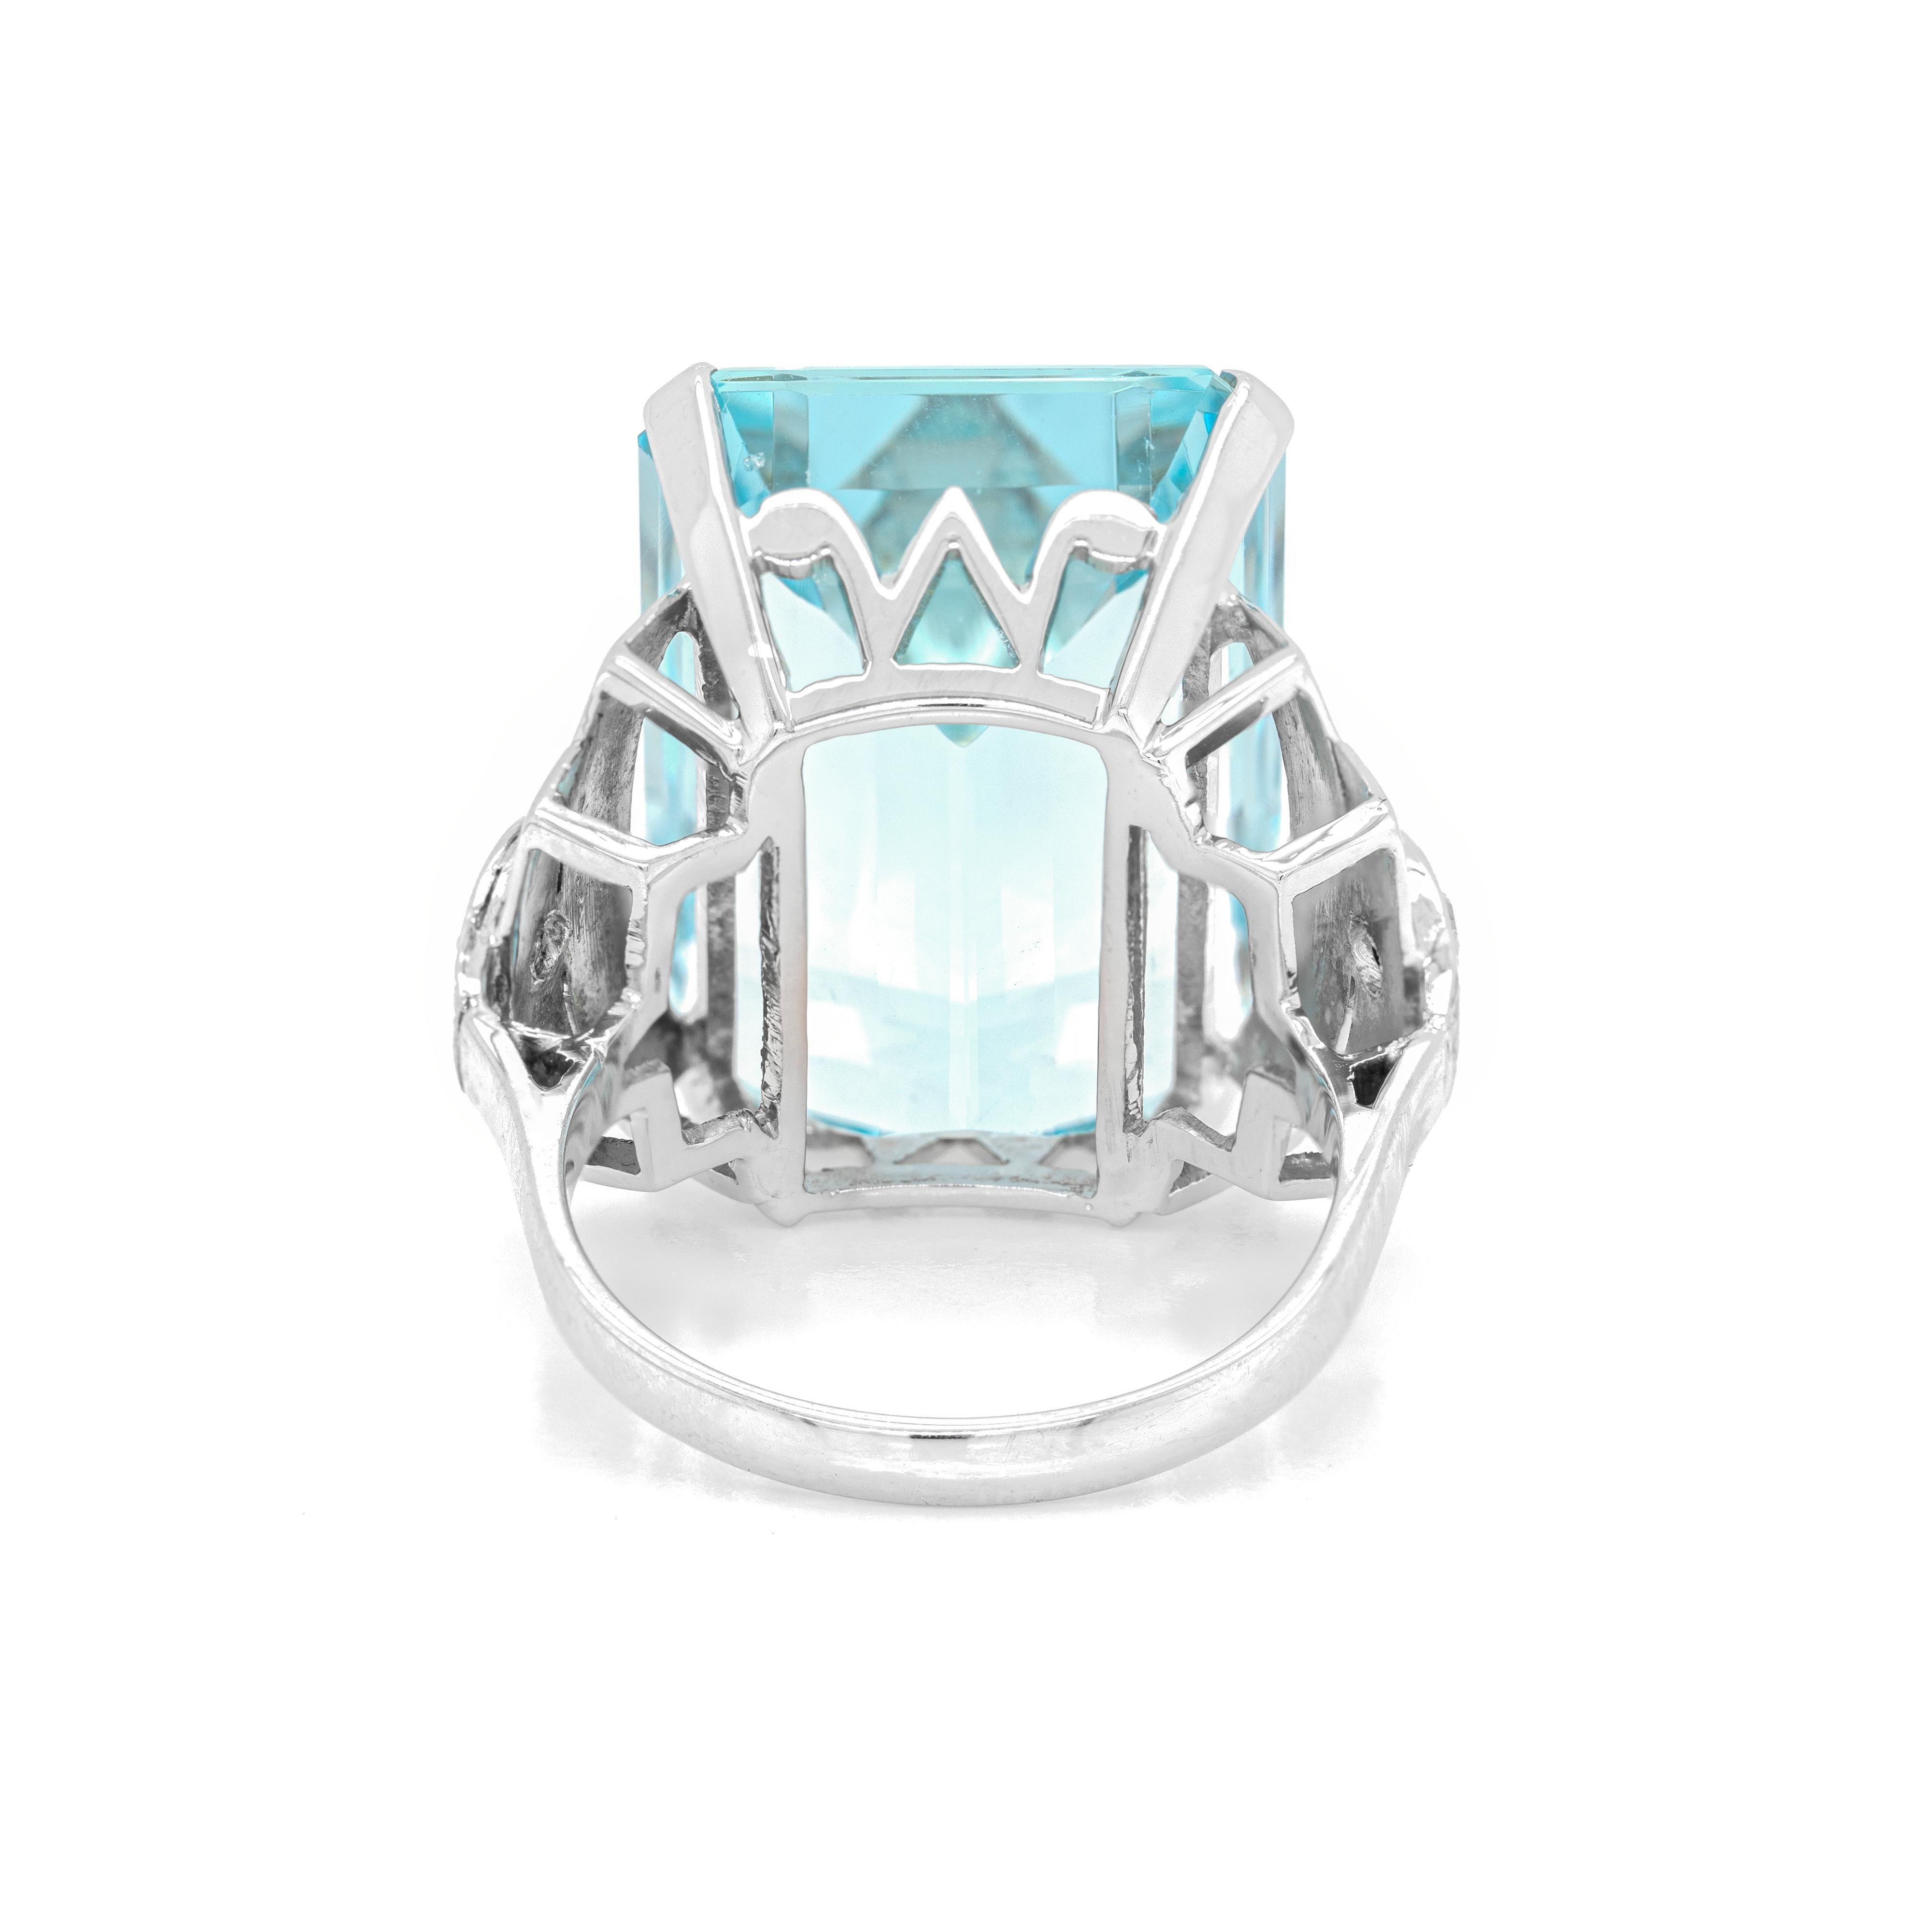 This spectacular 18 carat white gold cocktail ring is beautifully set with an emerald cut aquamarine weighing an impressive 22.00 carats mounted in a four claw, open back setting. An open work gallery and two eight cut diamonds weighing